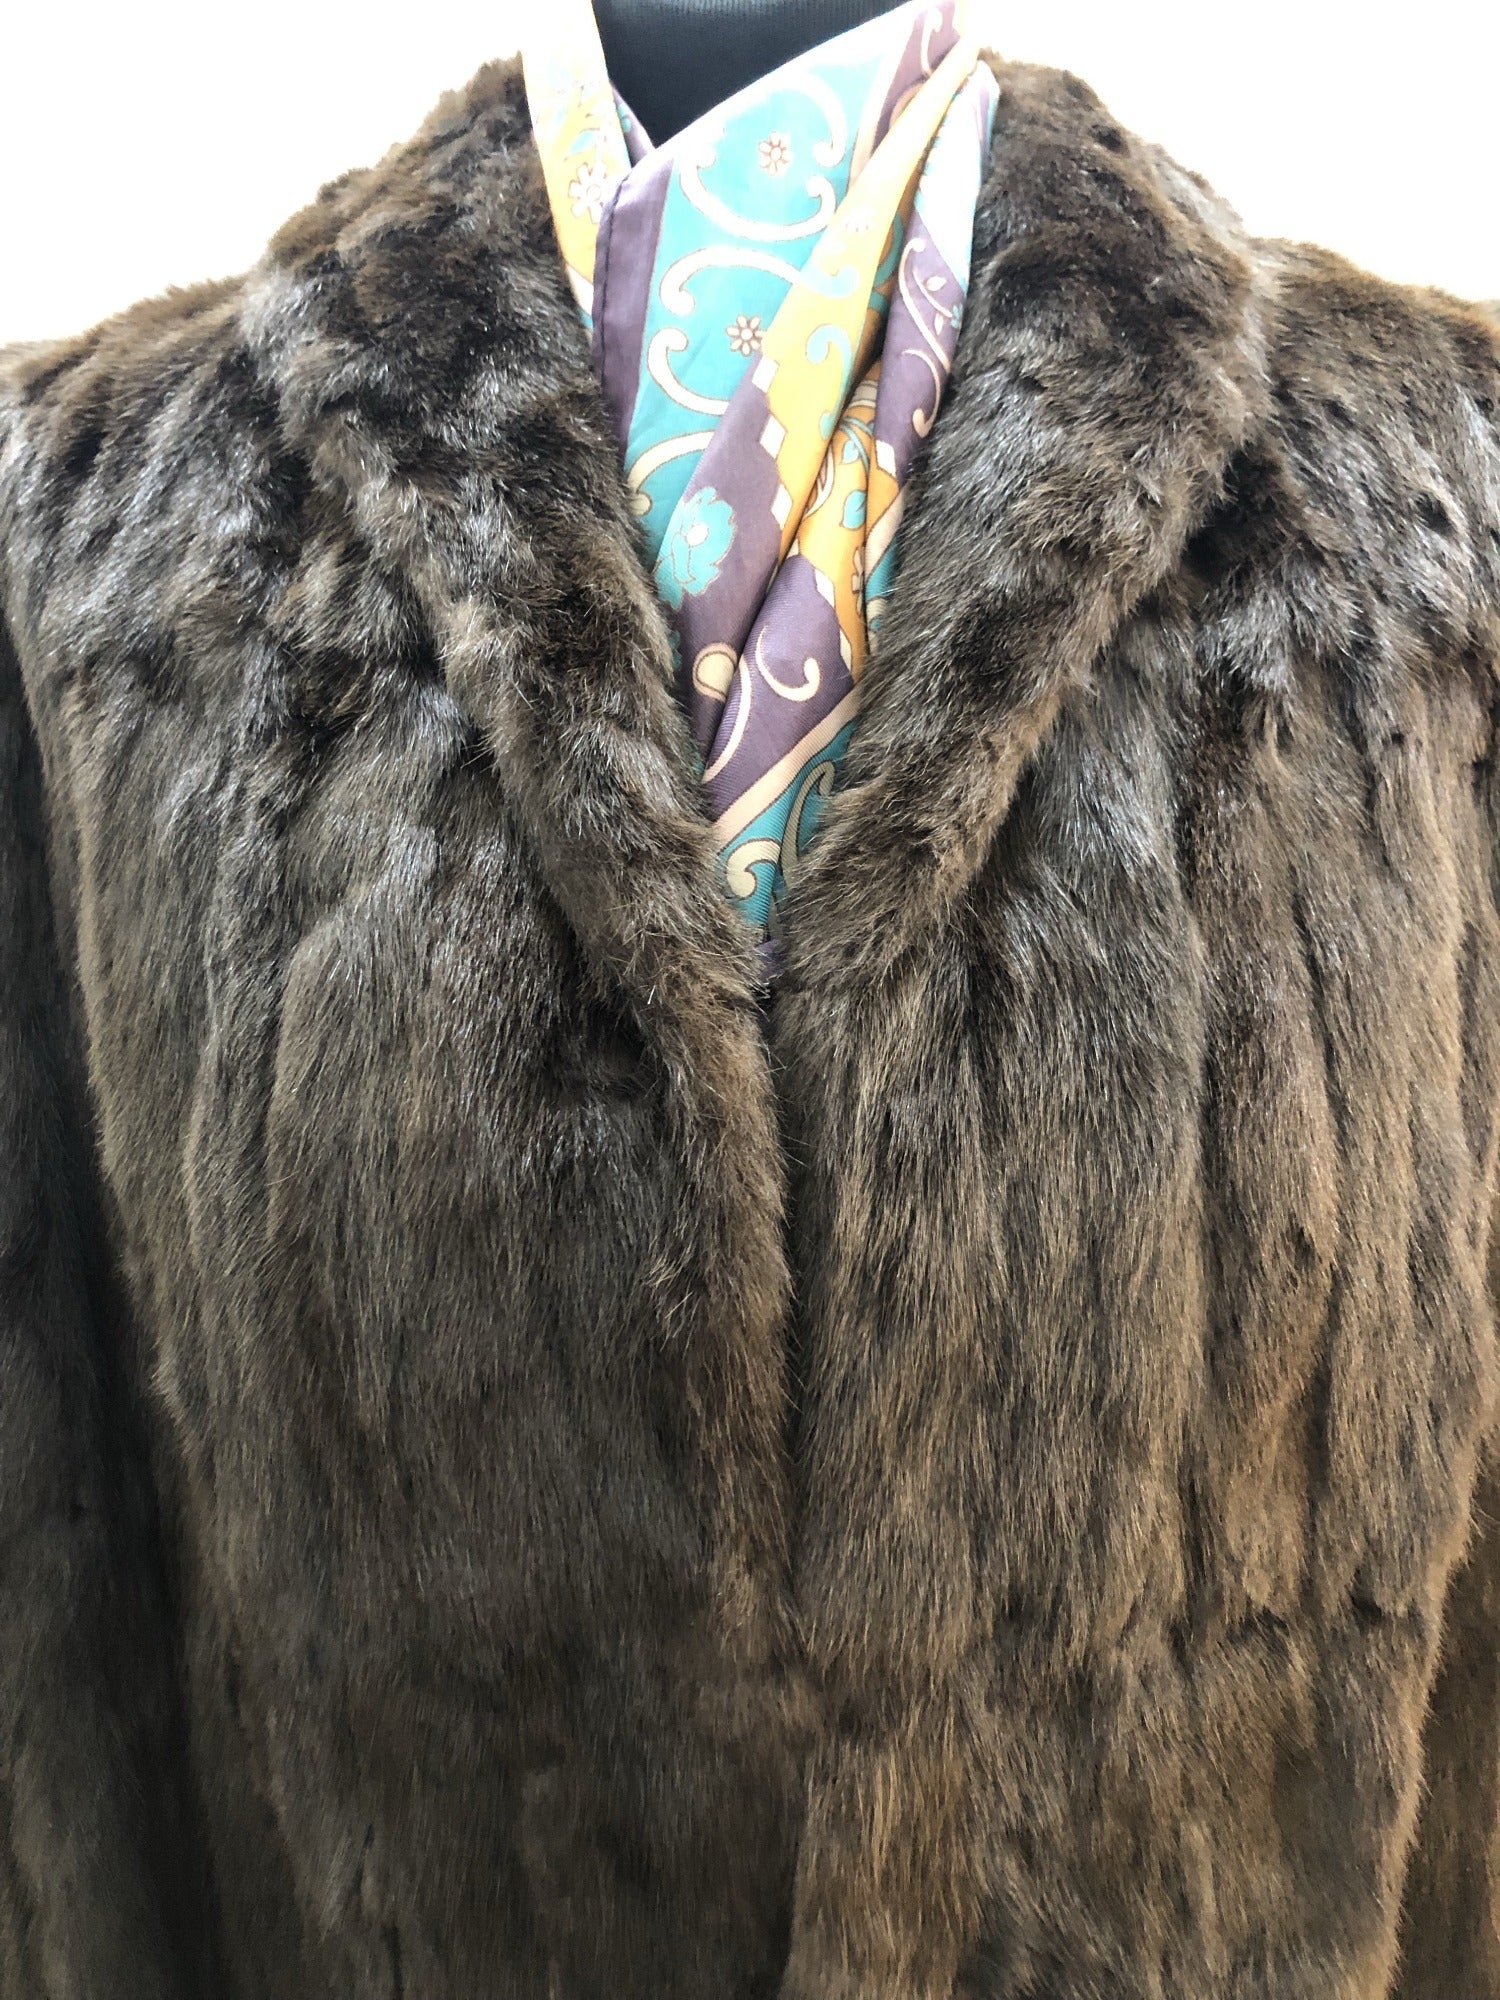 womens  vintage  Urban Village Vintage  urban village  Small  s  retro  real fur  mink  lining  lined  hook and eye  fur  evening  capelet  cape  brown  40s  40  1940s